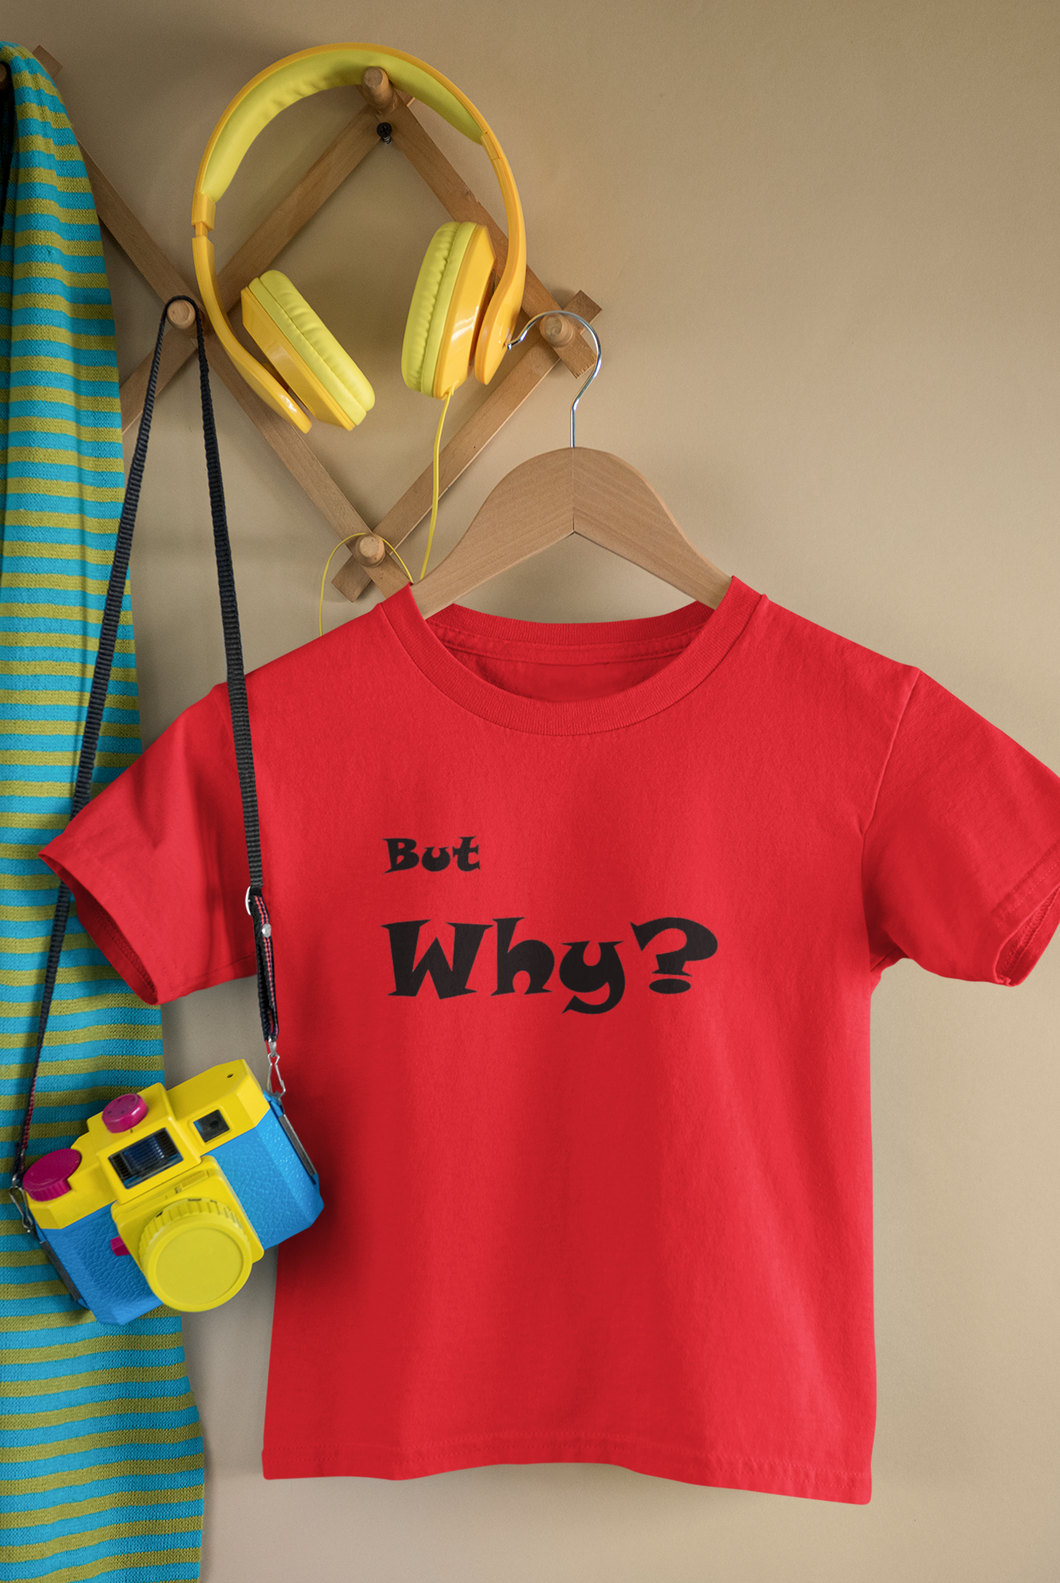 But Why? Kids T-shirt